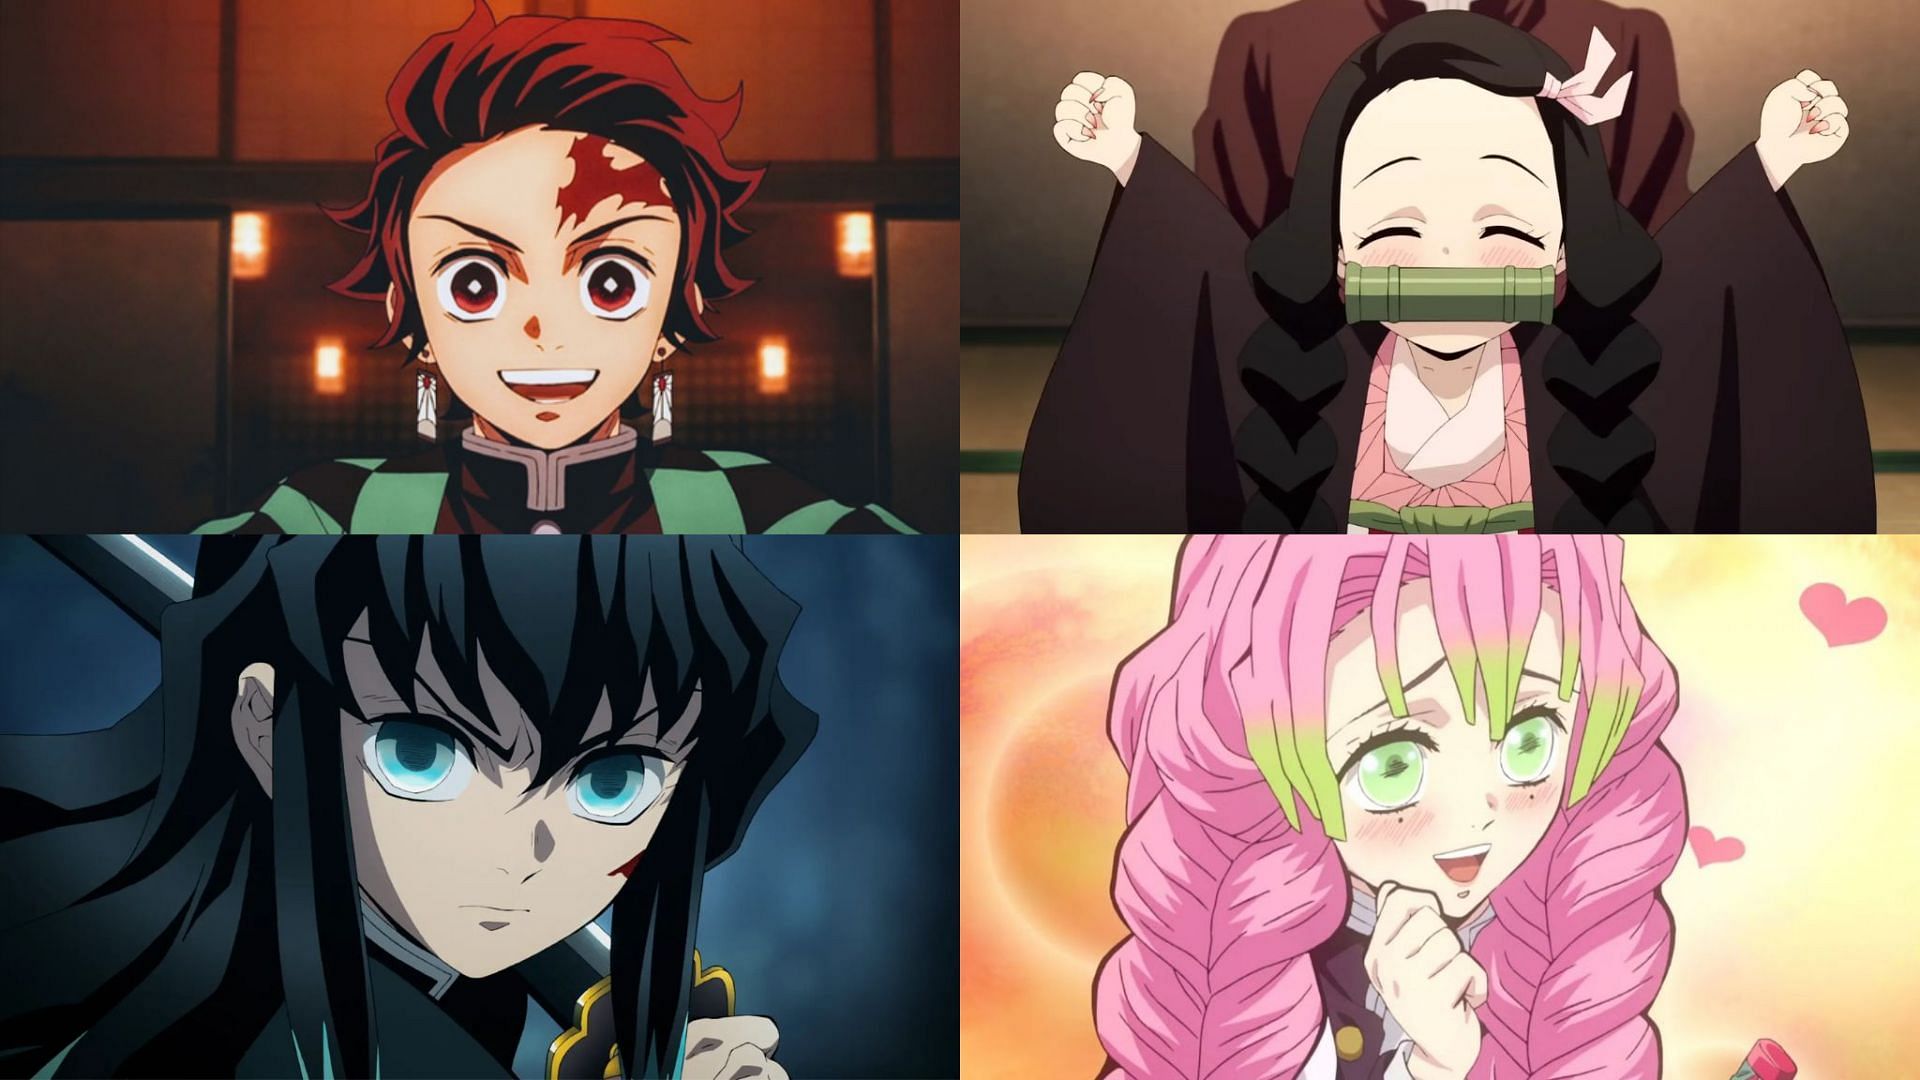 Demon Slayer': How Old Is Tanjiro, and How Does His Age Compare to